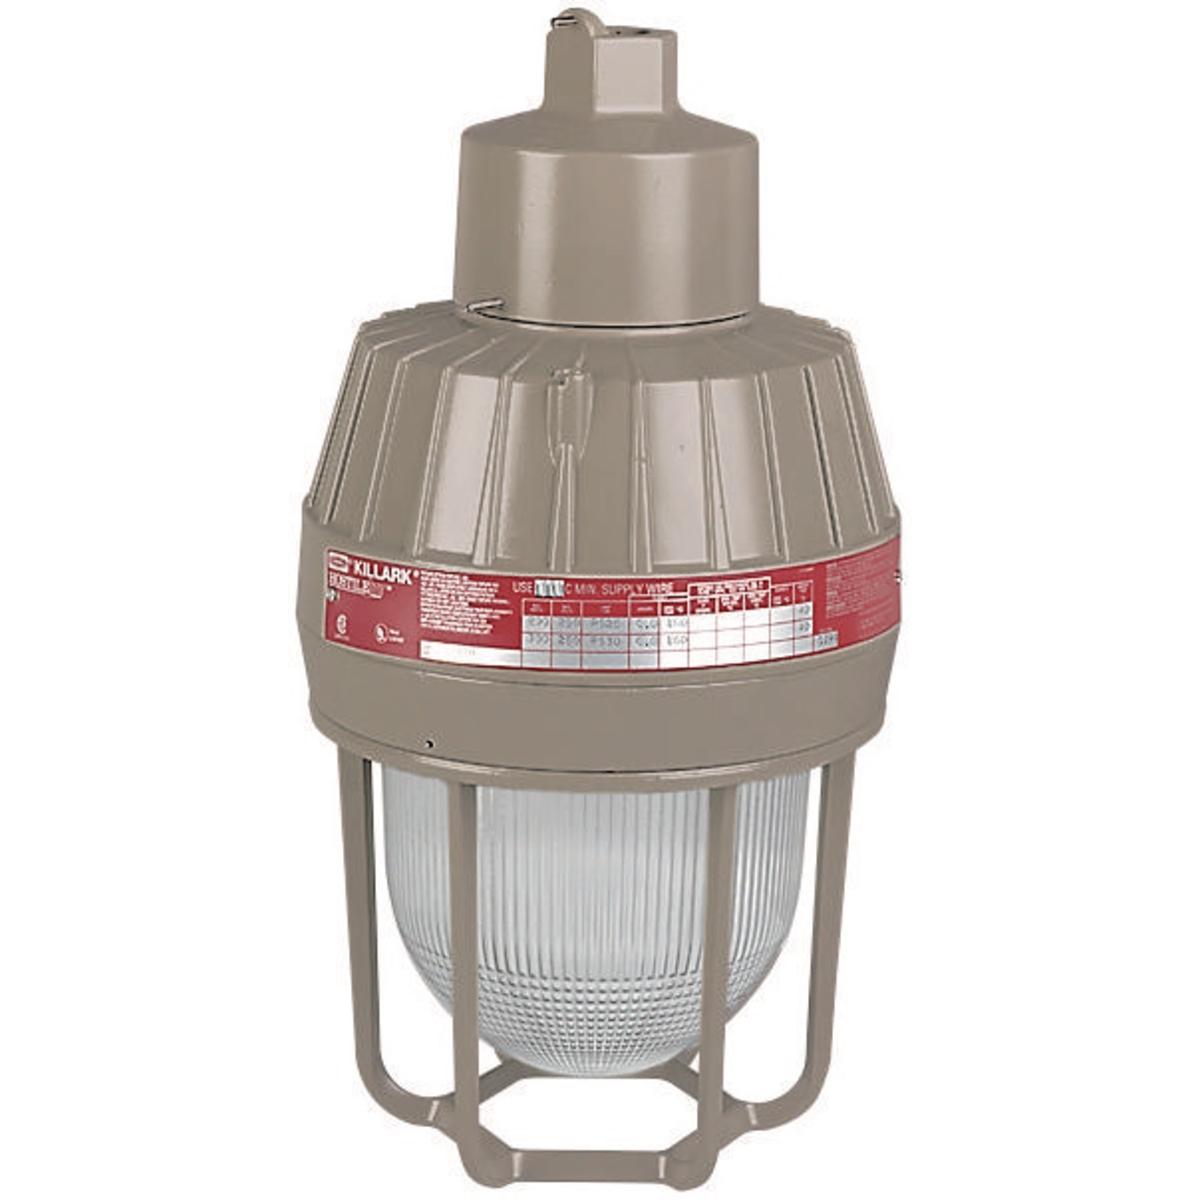 Hubbell EMS105B2GDAT SU103 HID 100W 480V HPS - 3/4" Wall Mount with Dual Arc Lamp - Assembled with Lamp  ; Four light sources—Incandescent, compact fluorescent, high pressure sodium and metal halide ; Mounting choice—Pendant, ceiling, 25˚ stanchion or 90˚ wall mount, all with “wire